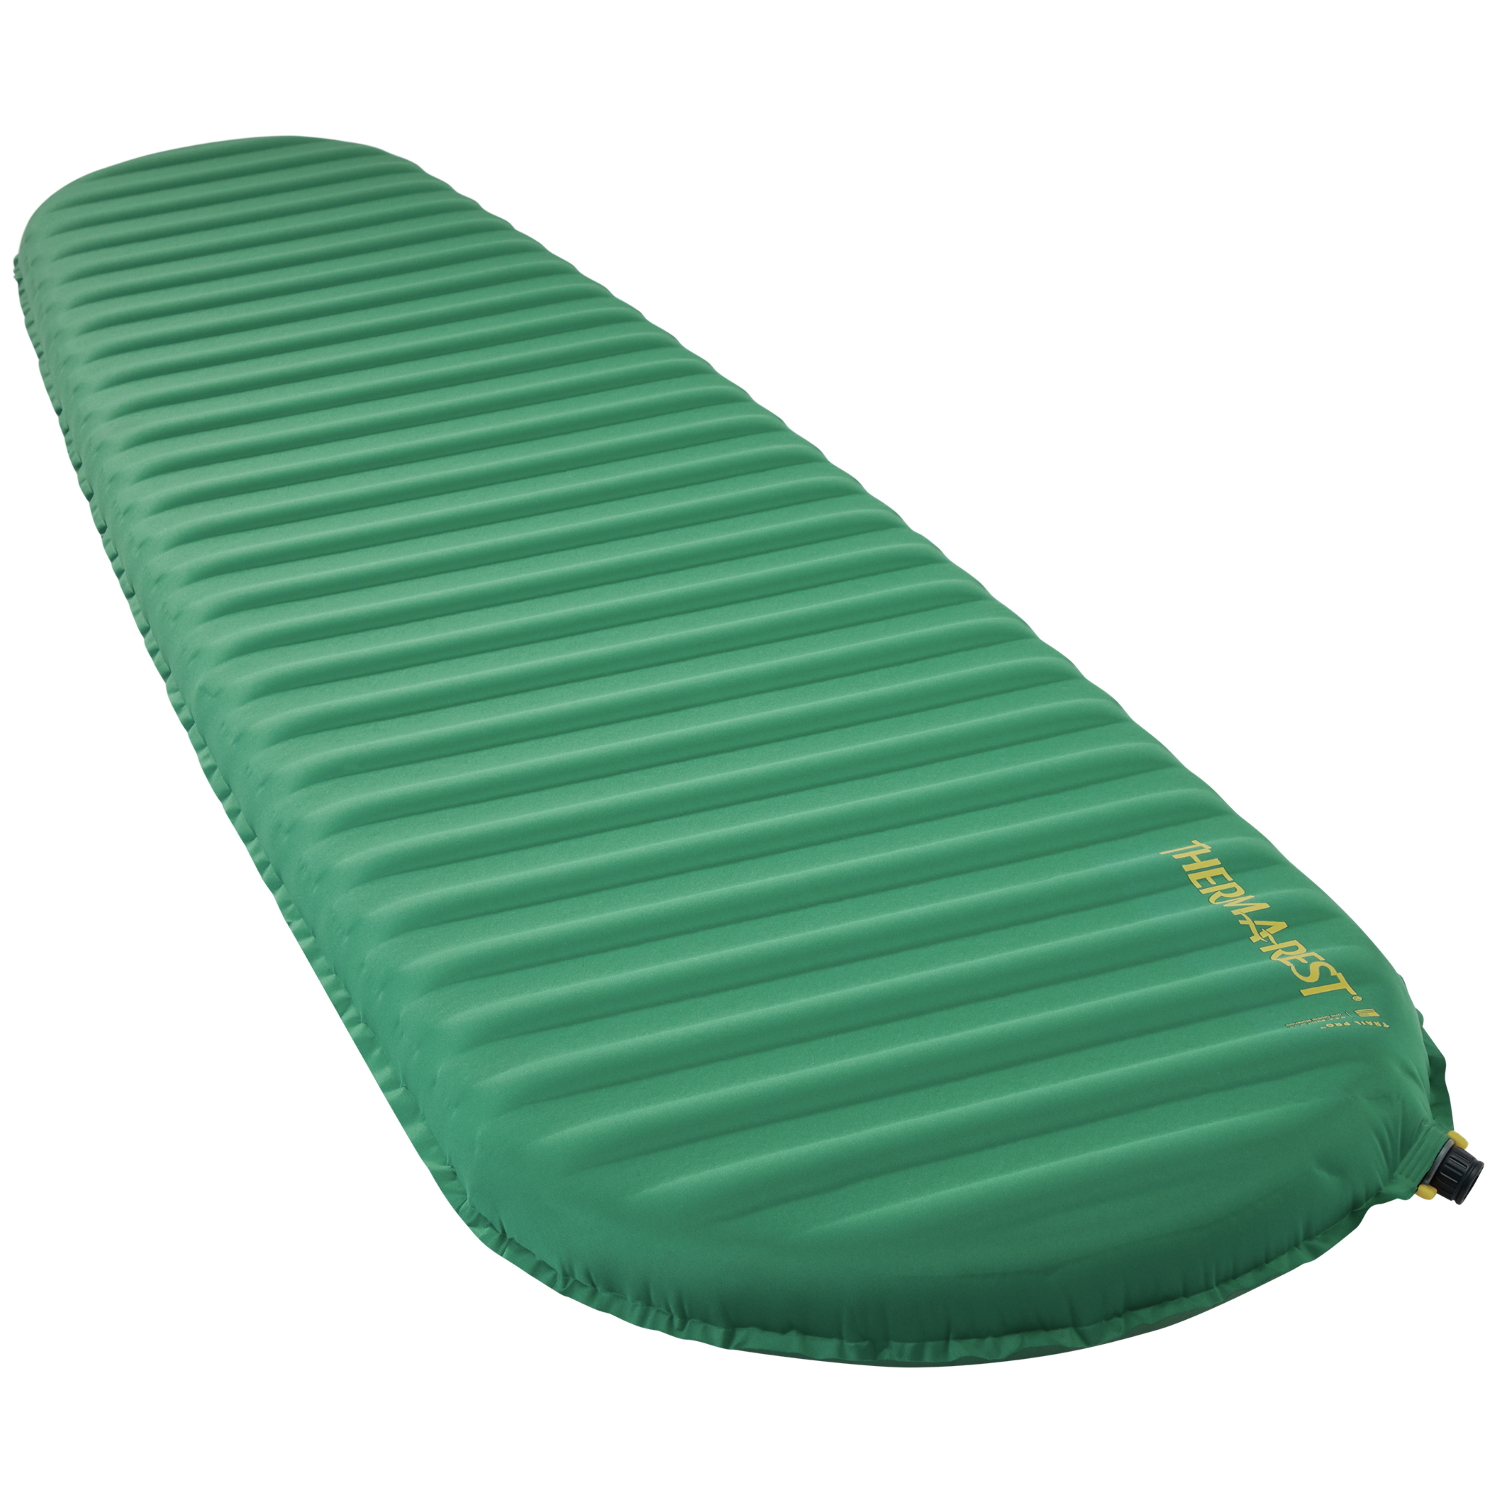 Picture of Therm-a-Rest Trail Pro Sleeping Pad - Large - pine